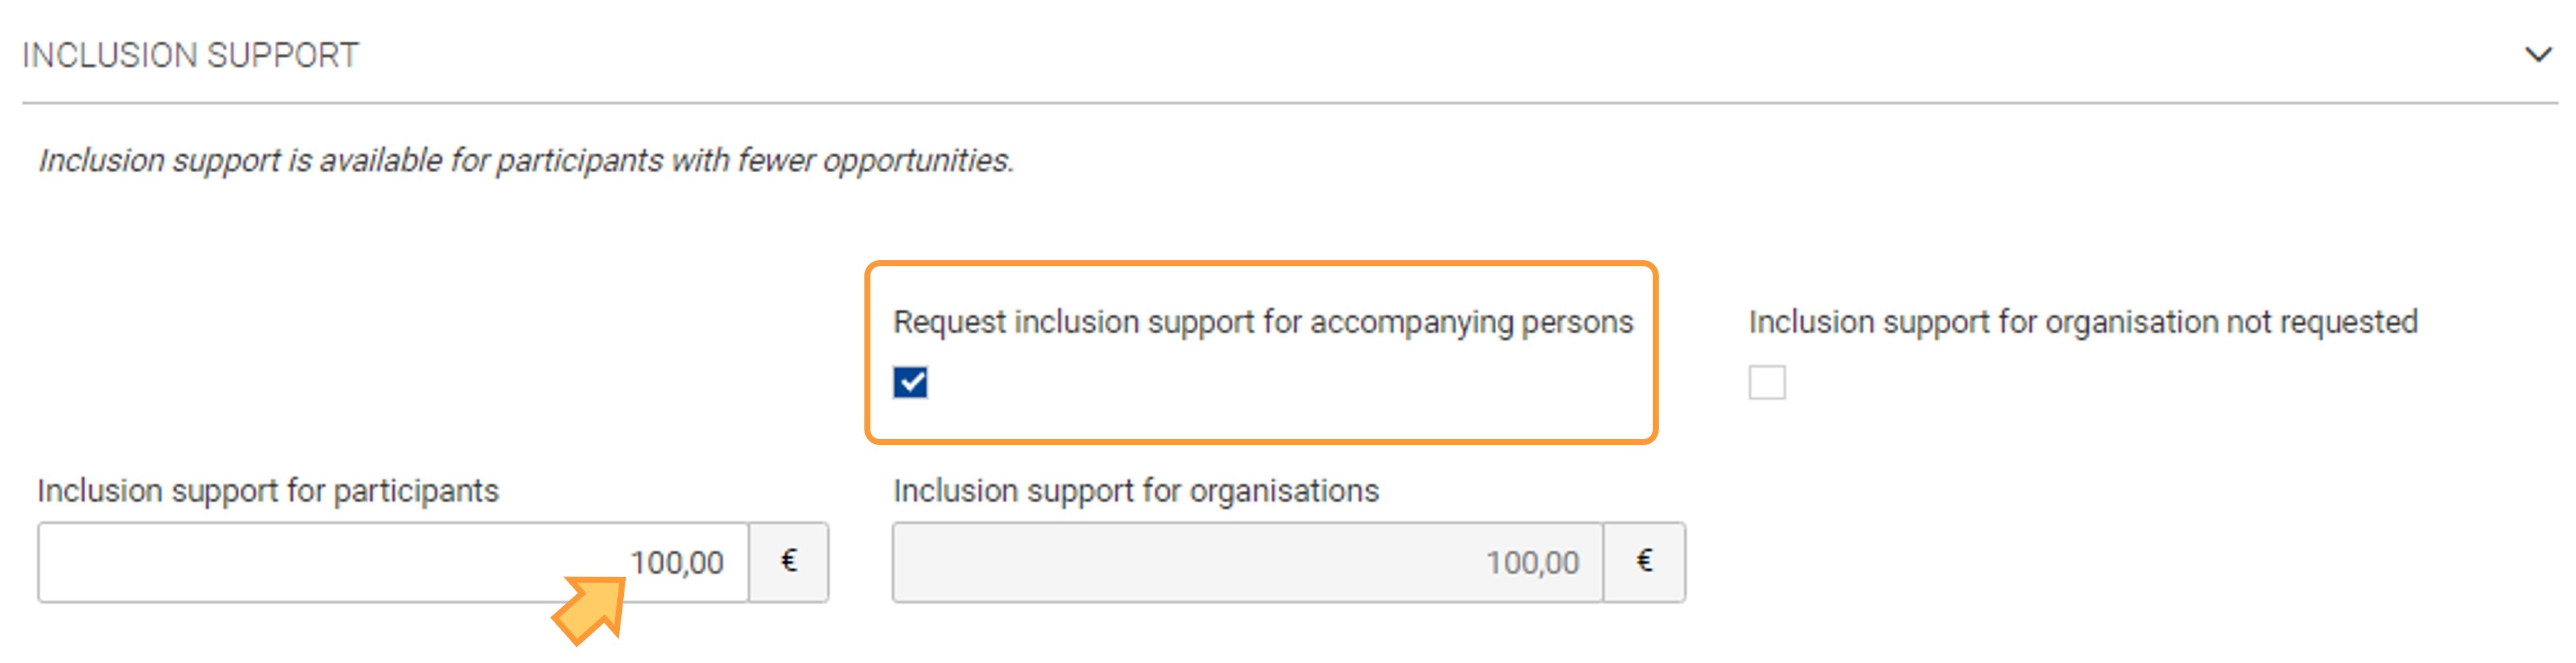 Request inclusion support for accompanying persons flag